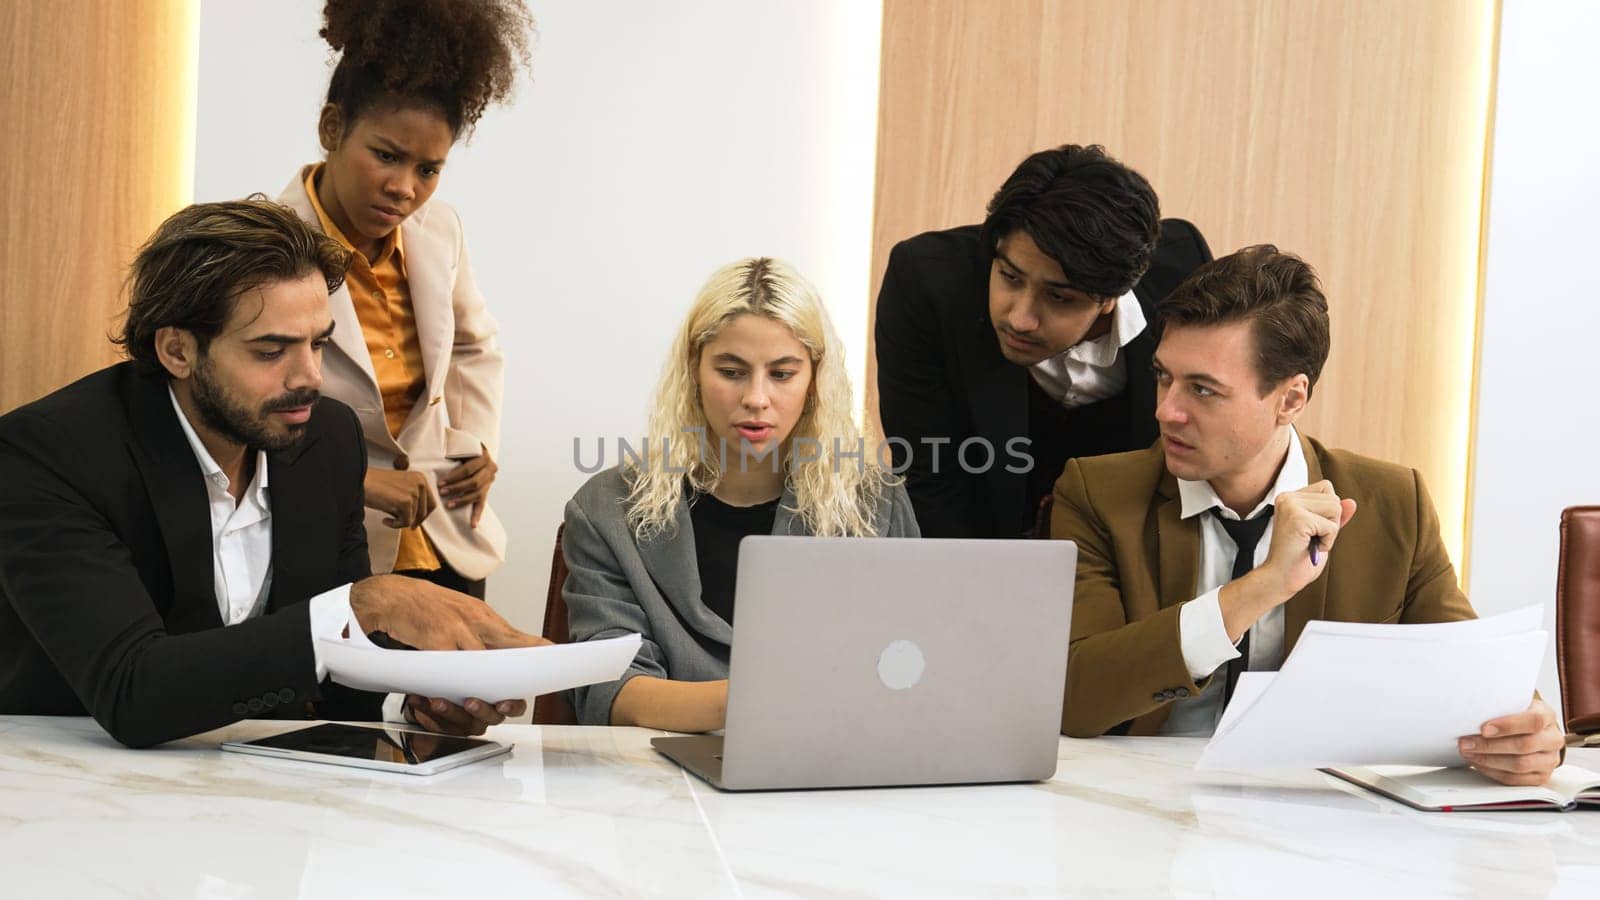 Diverse office worker employee working and brainstorm on strategic business marketing planning. Teamwork and positive attitude create productive and supportive in ornamented business office workplace.